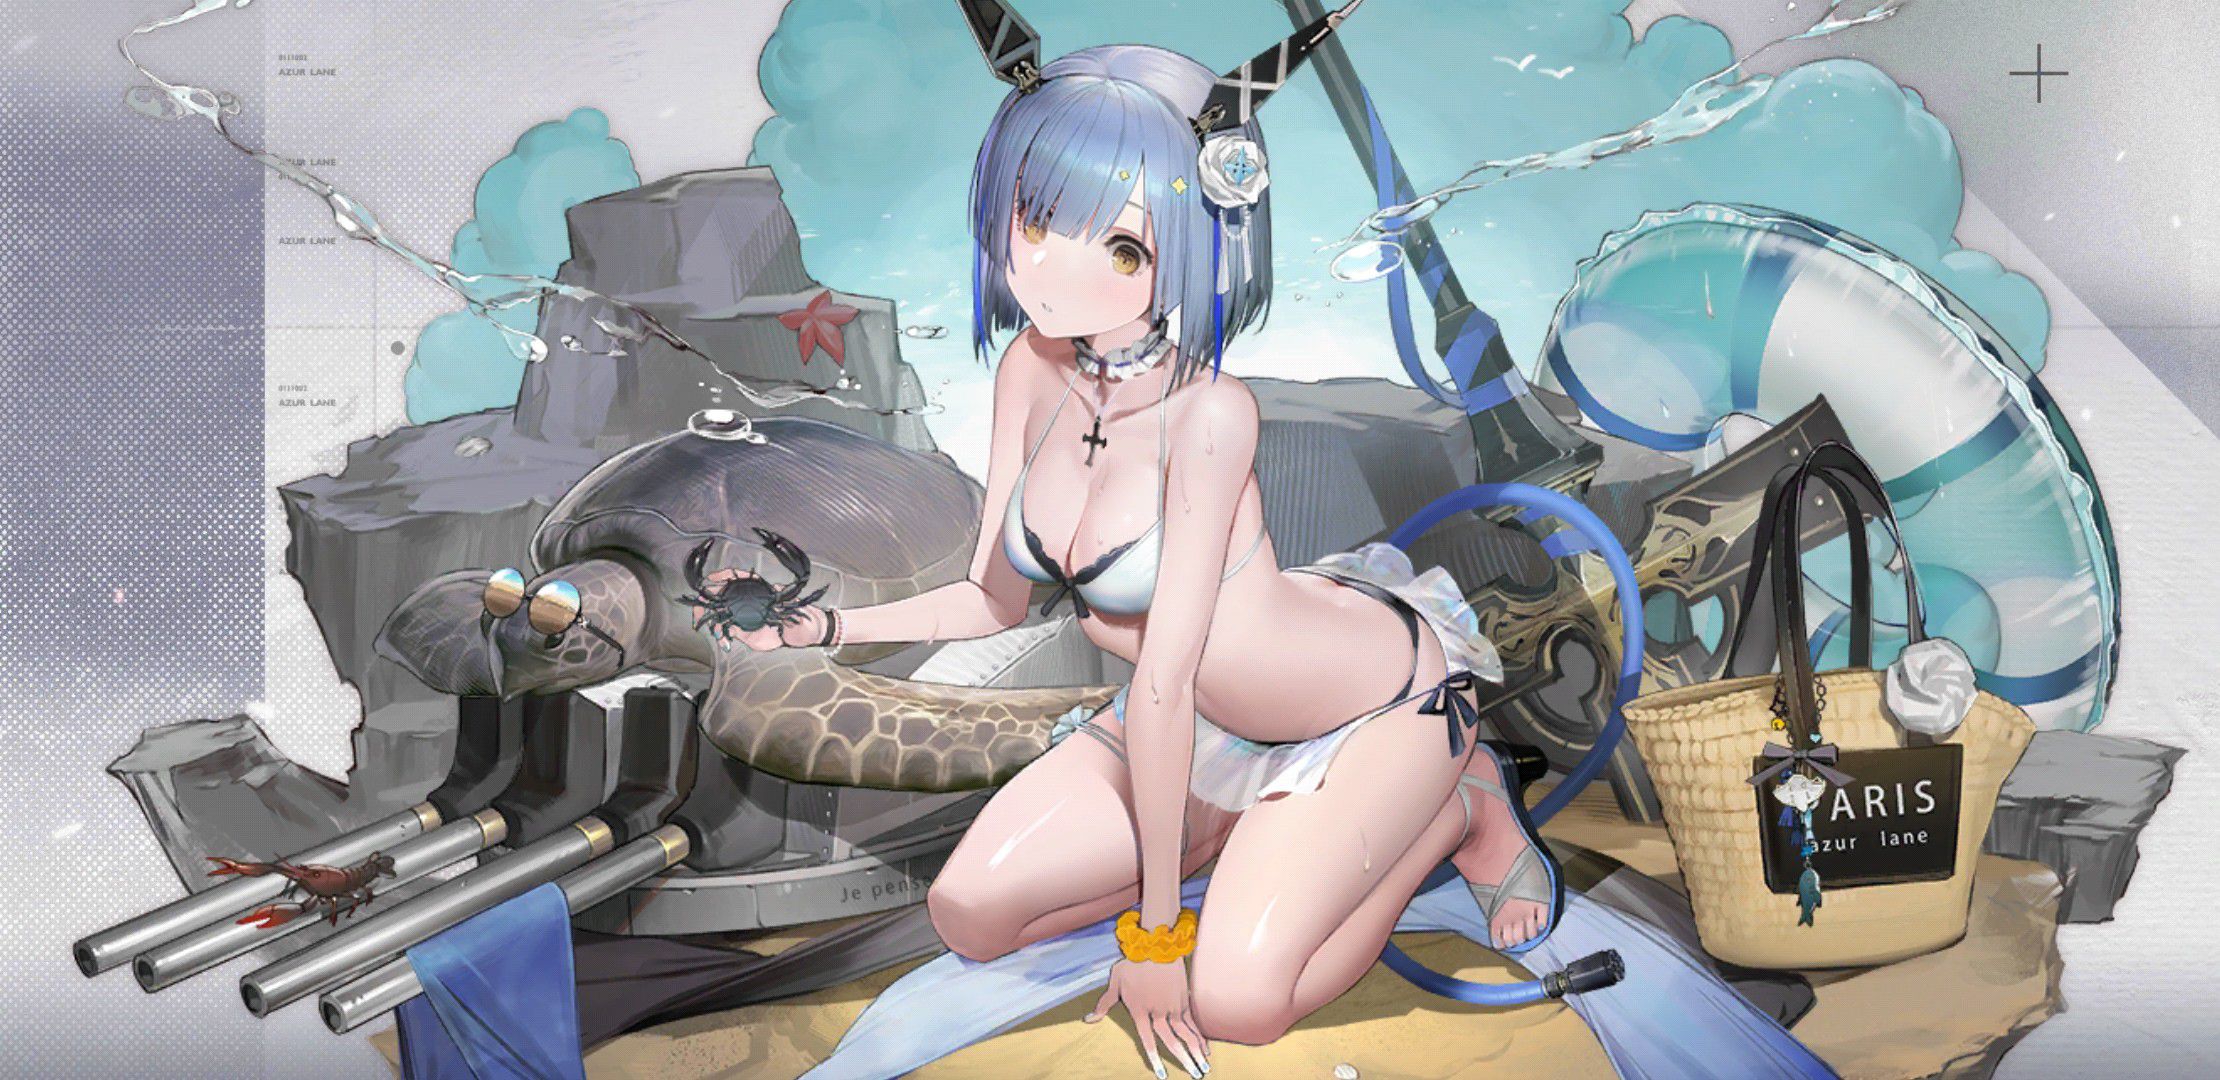 【There is an image】 Smartphone that urges charging with erotic swimsuits is malicious 46